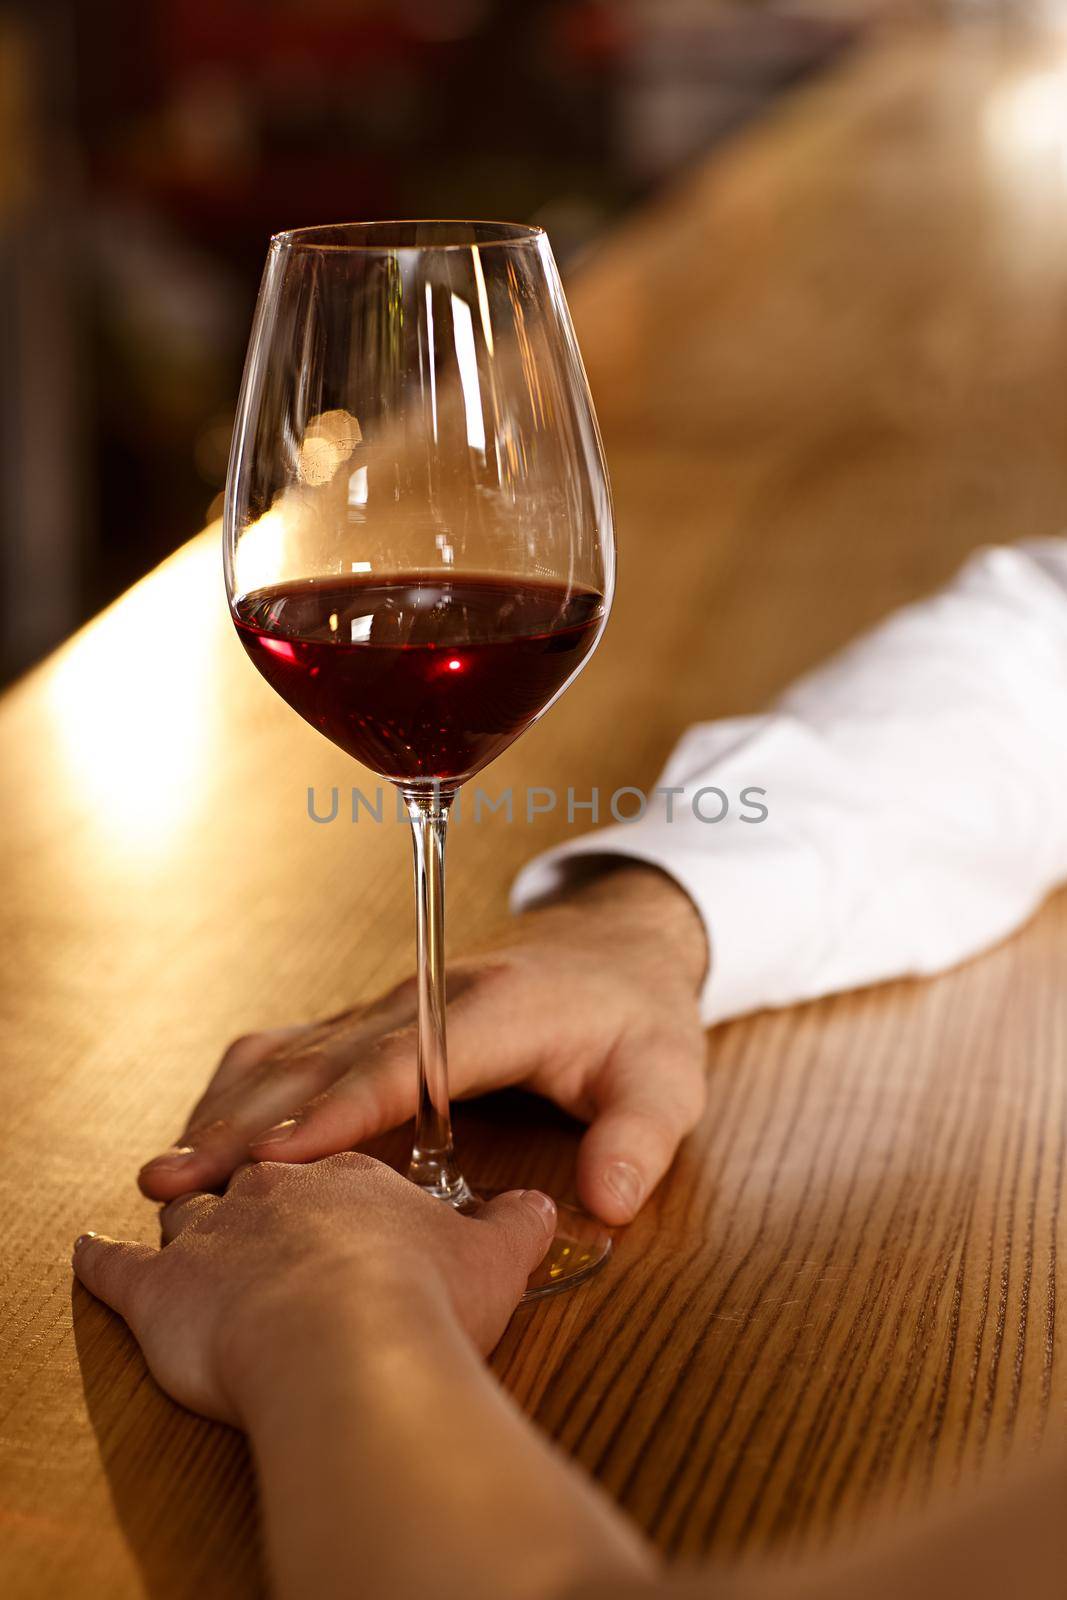 Connections made. Cropped closeup of a man touching the hand of a woman holding a glass of wine on a bar counter